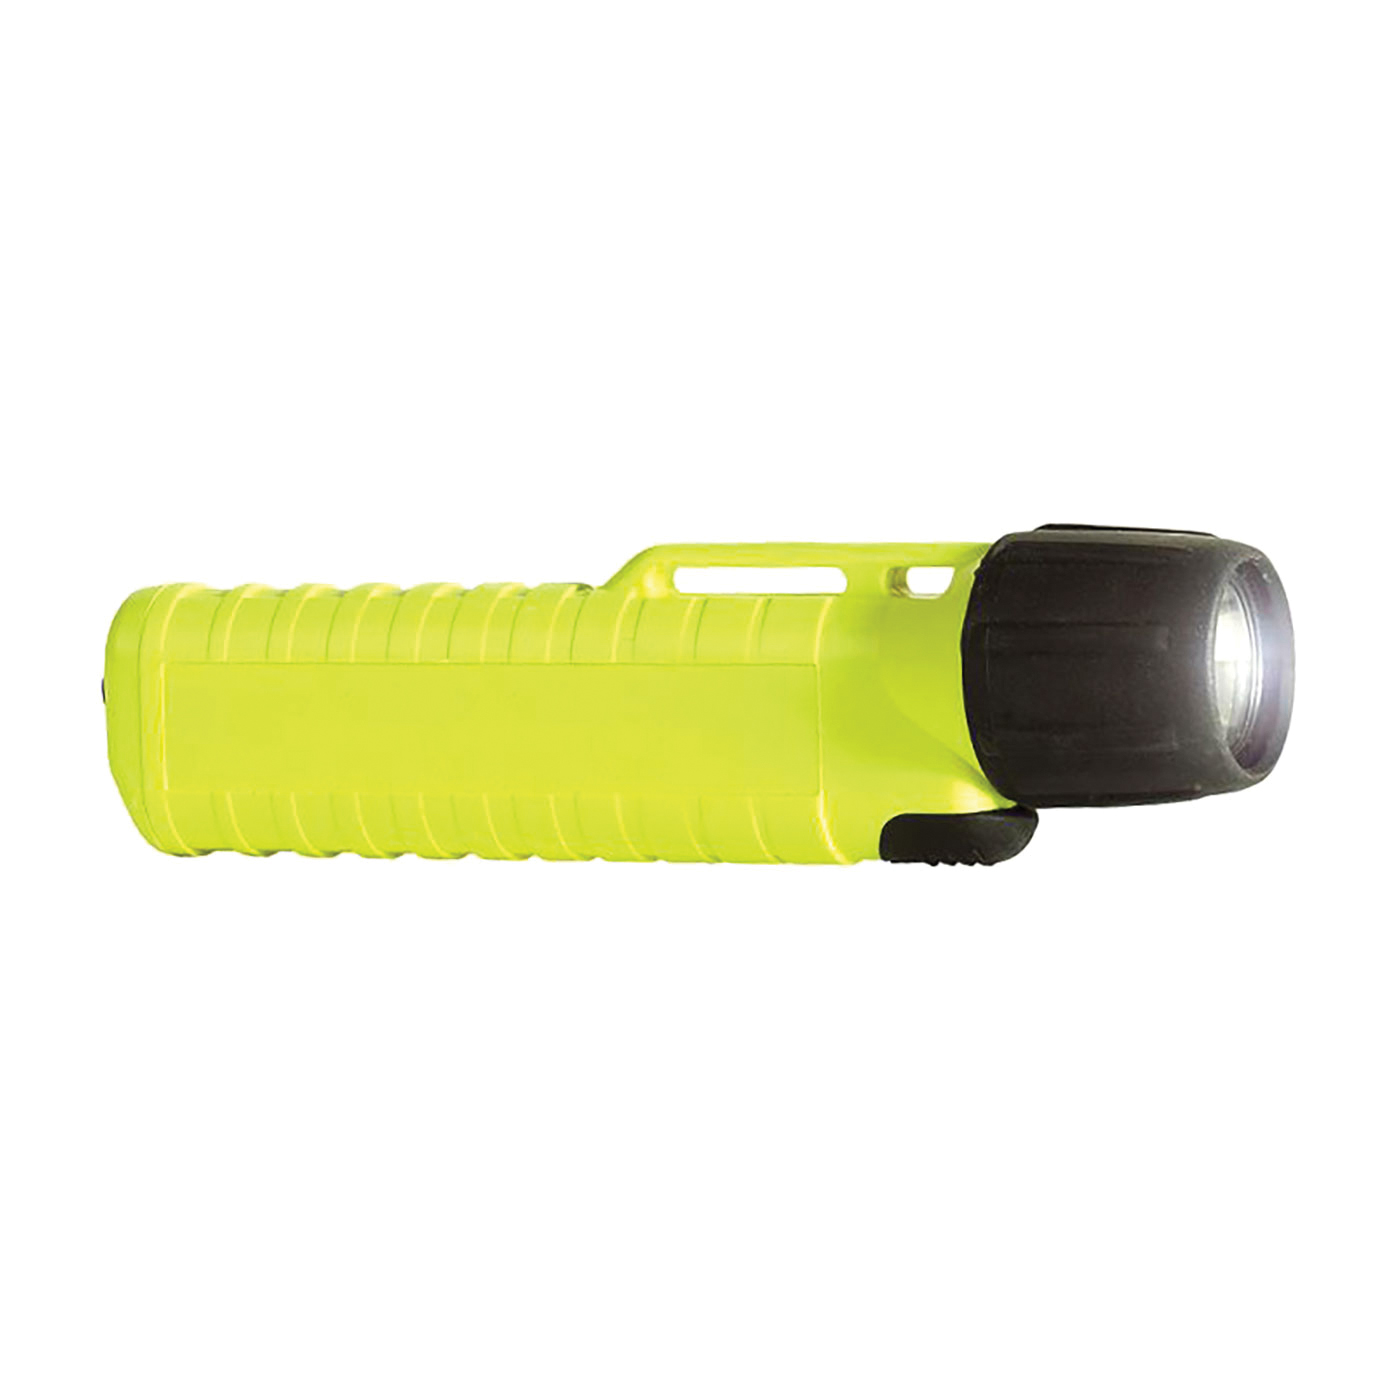 PIP® 933-A104120 LED Wide Beam Flashlight, For Use With Helmet/Hard Hat, Universal, ABS/LEXAN®/Polyurethane Rubber, Safety Yellow